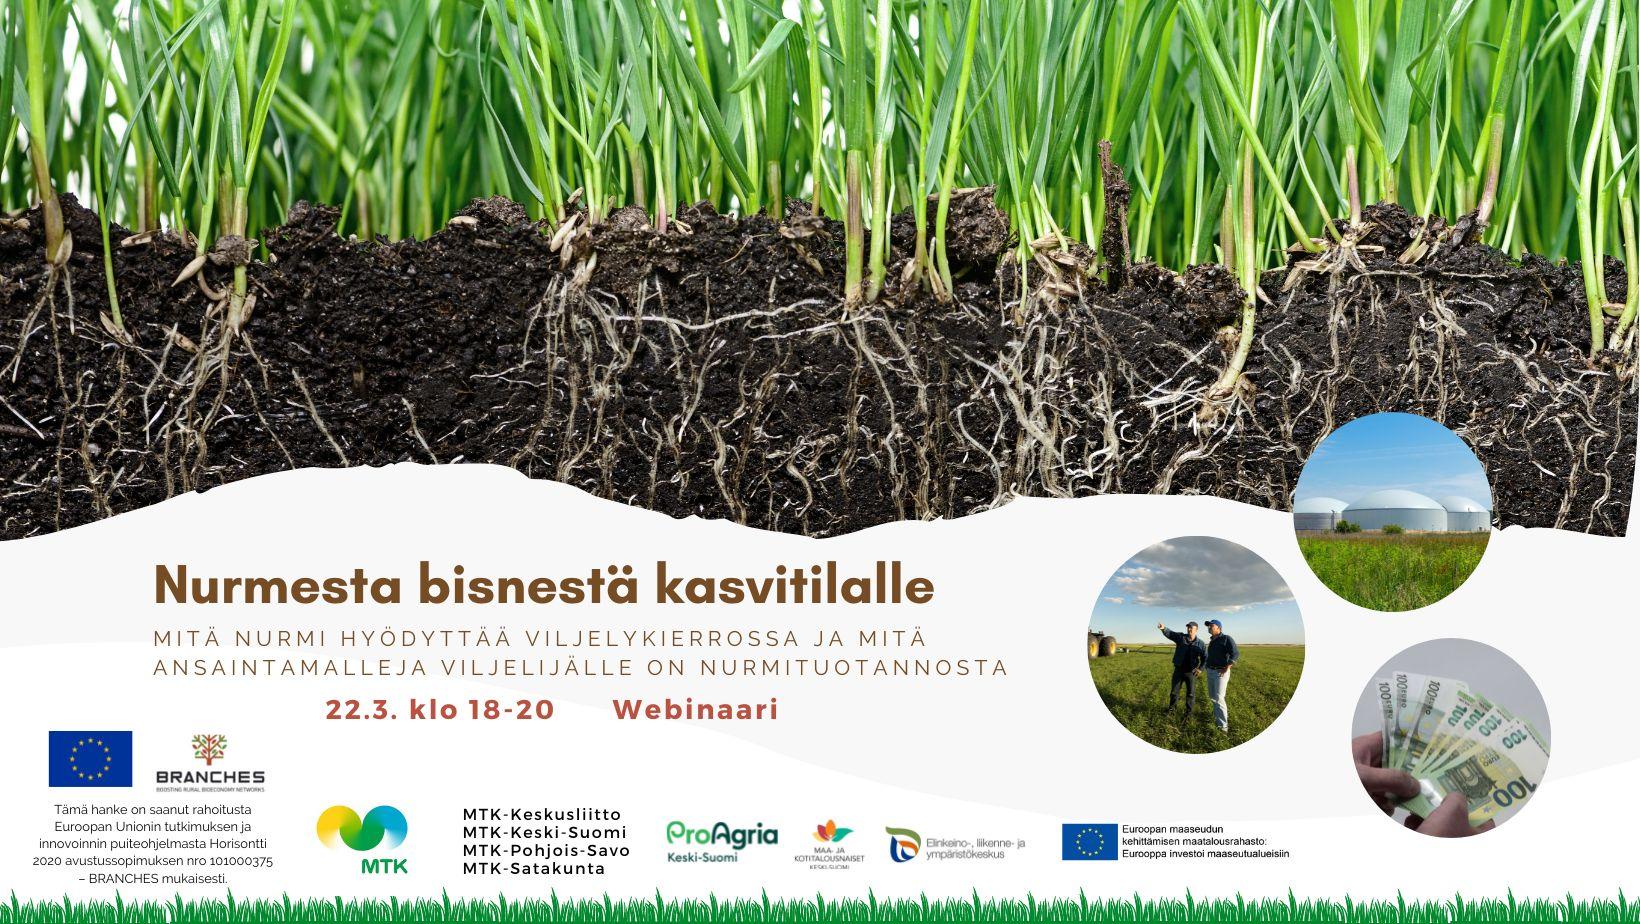 Turning grass into business -webinar in Finland on 22nd of March